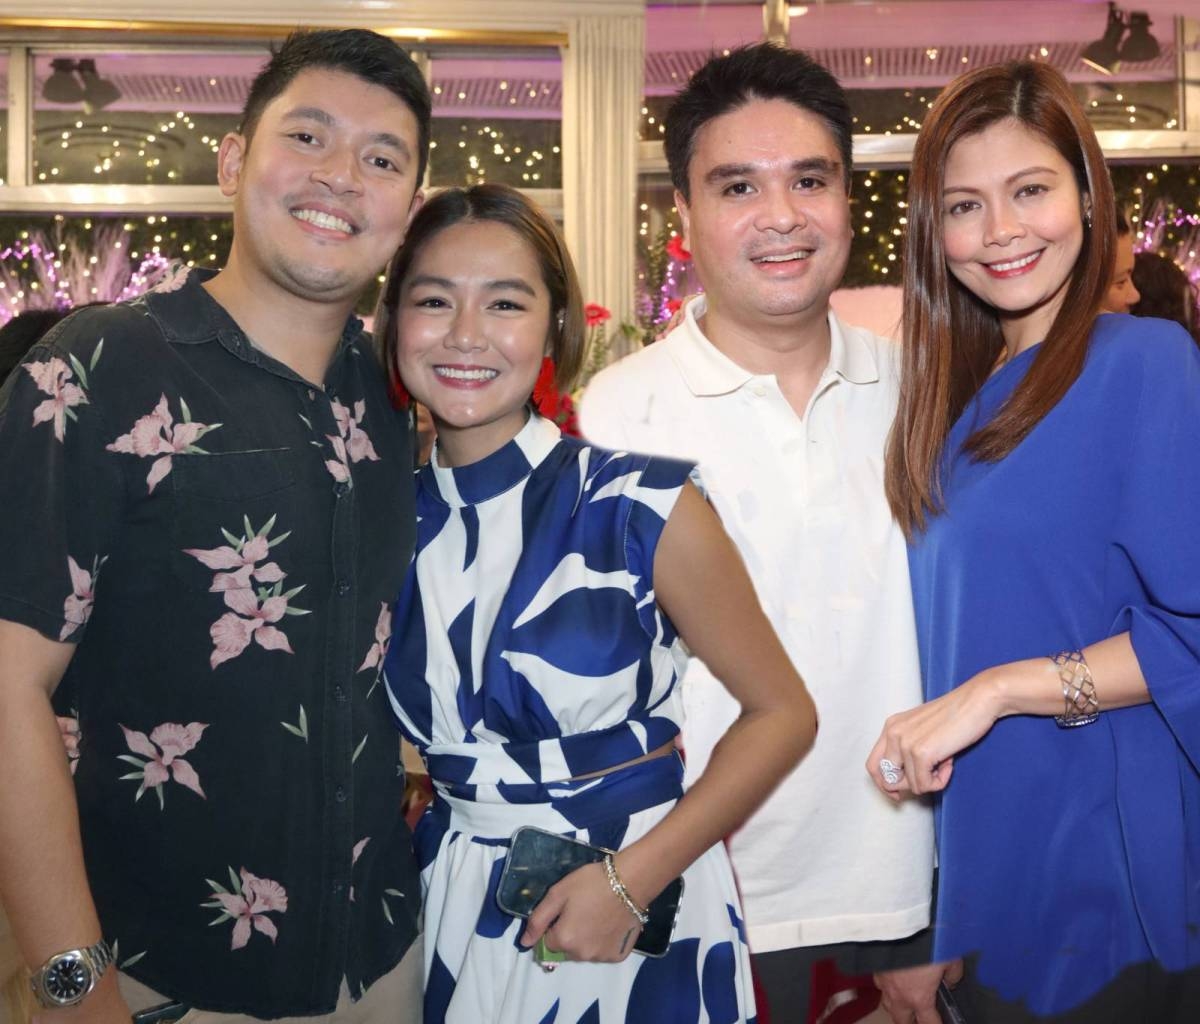  Marco Gonzales and Lorraine Lopez, Mike Yuseco and Andrea Gonzales